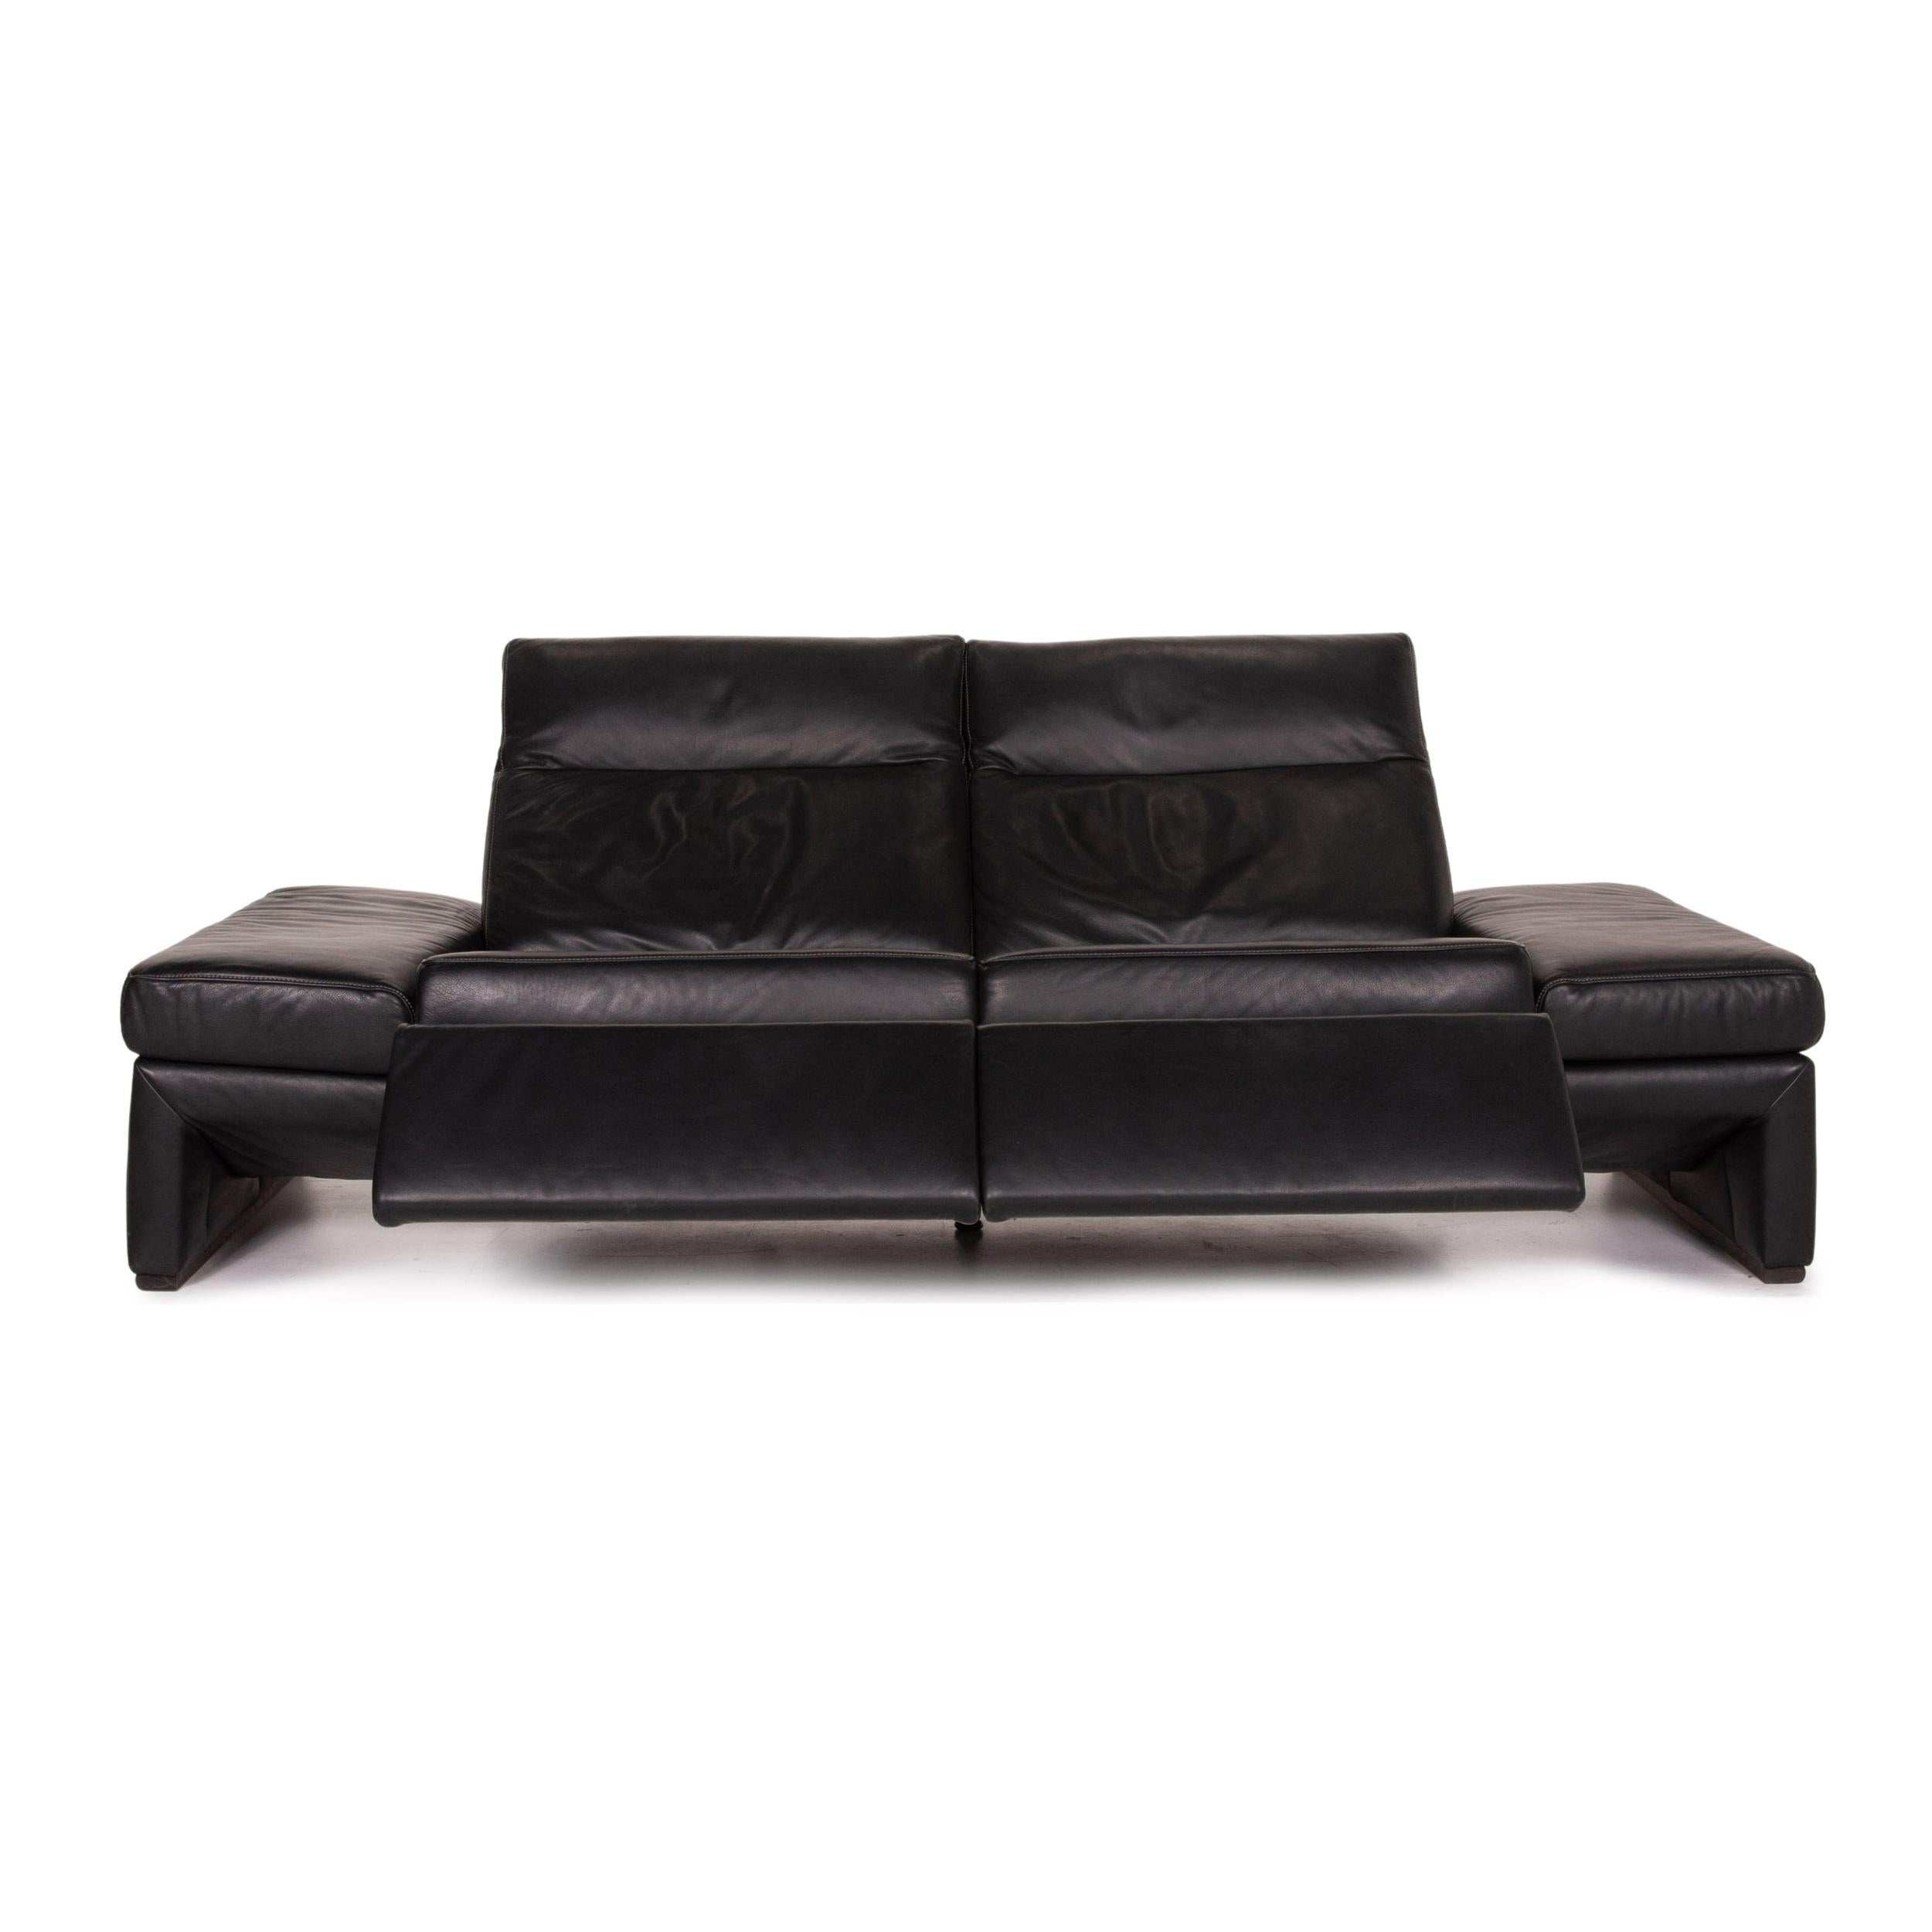 Modern Mondo Leather Sofa Black Three-Seat Electrical Function Relaxation Function